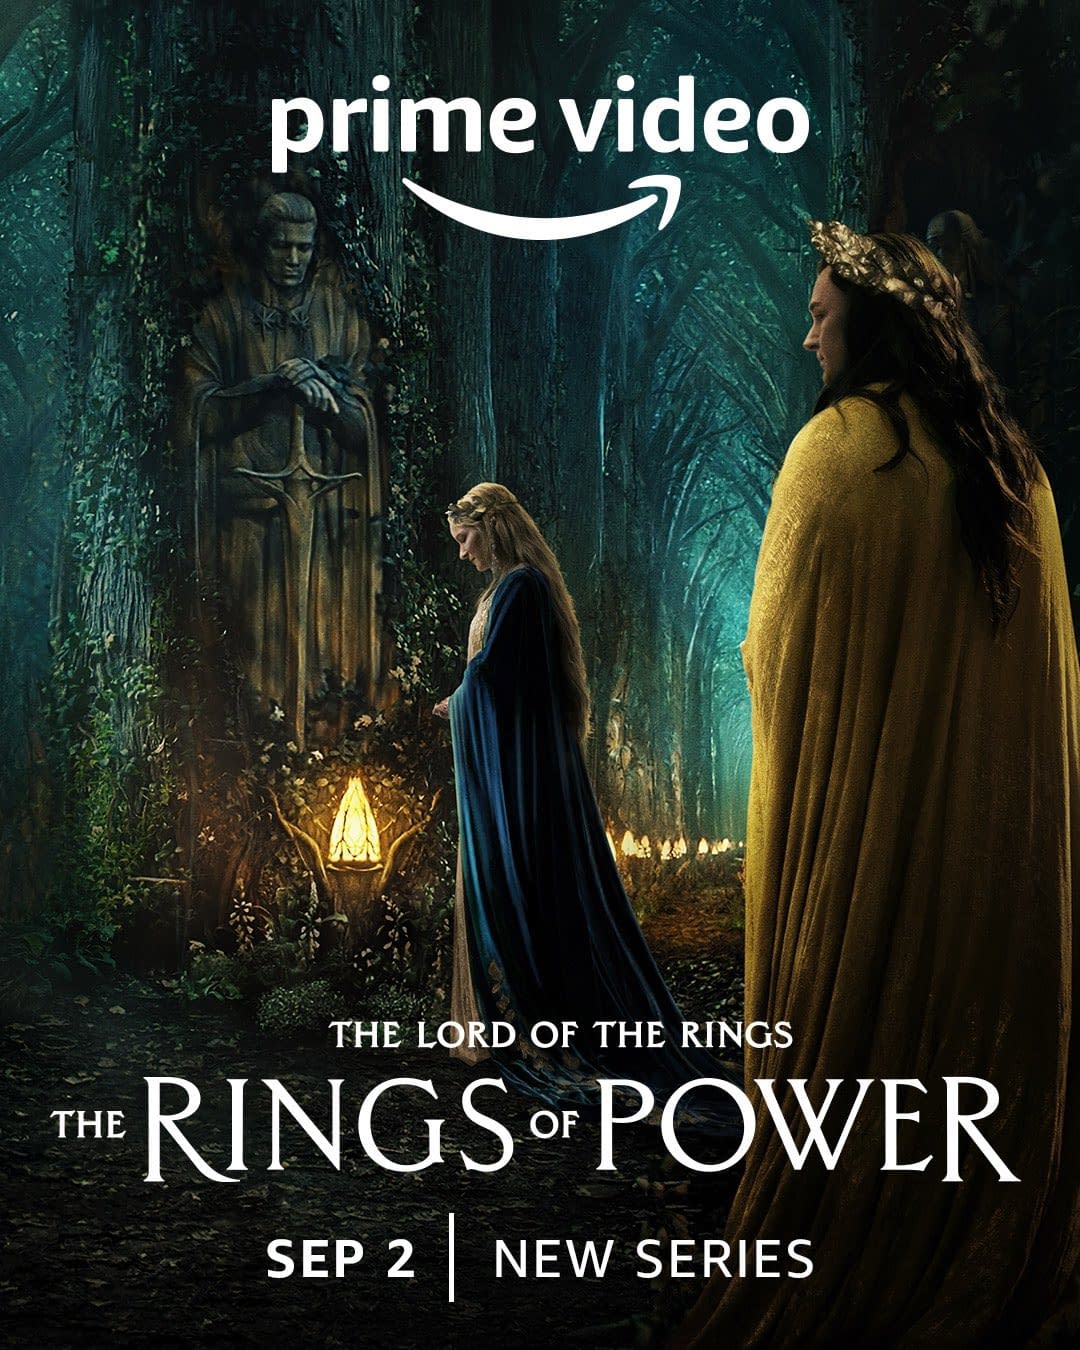 Lord of the Rings: Rings of Power' Release Schedule: When Do New